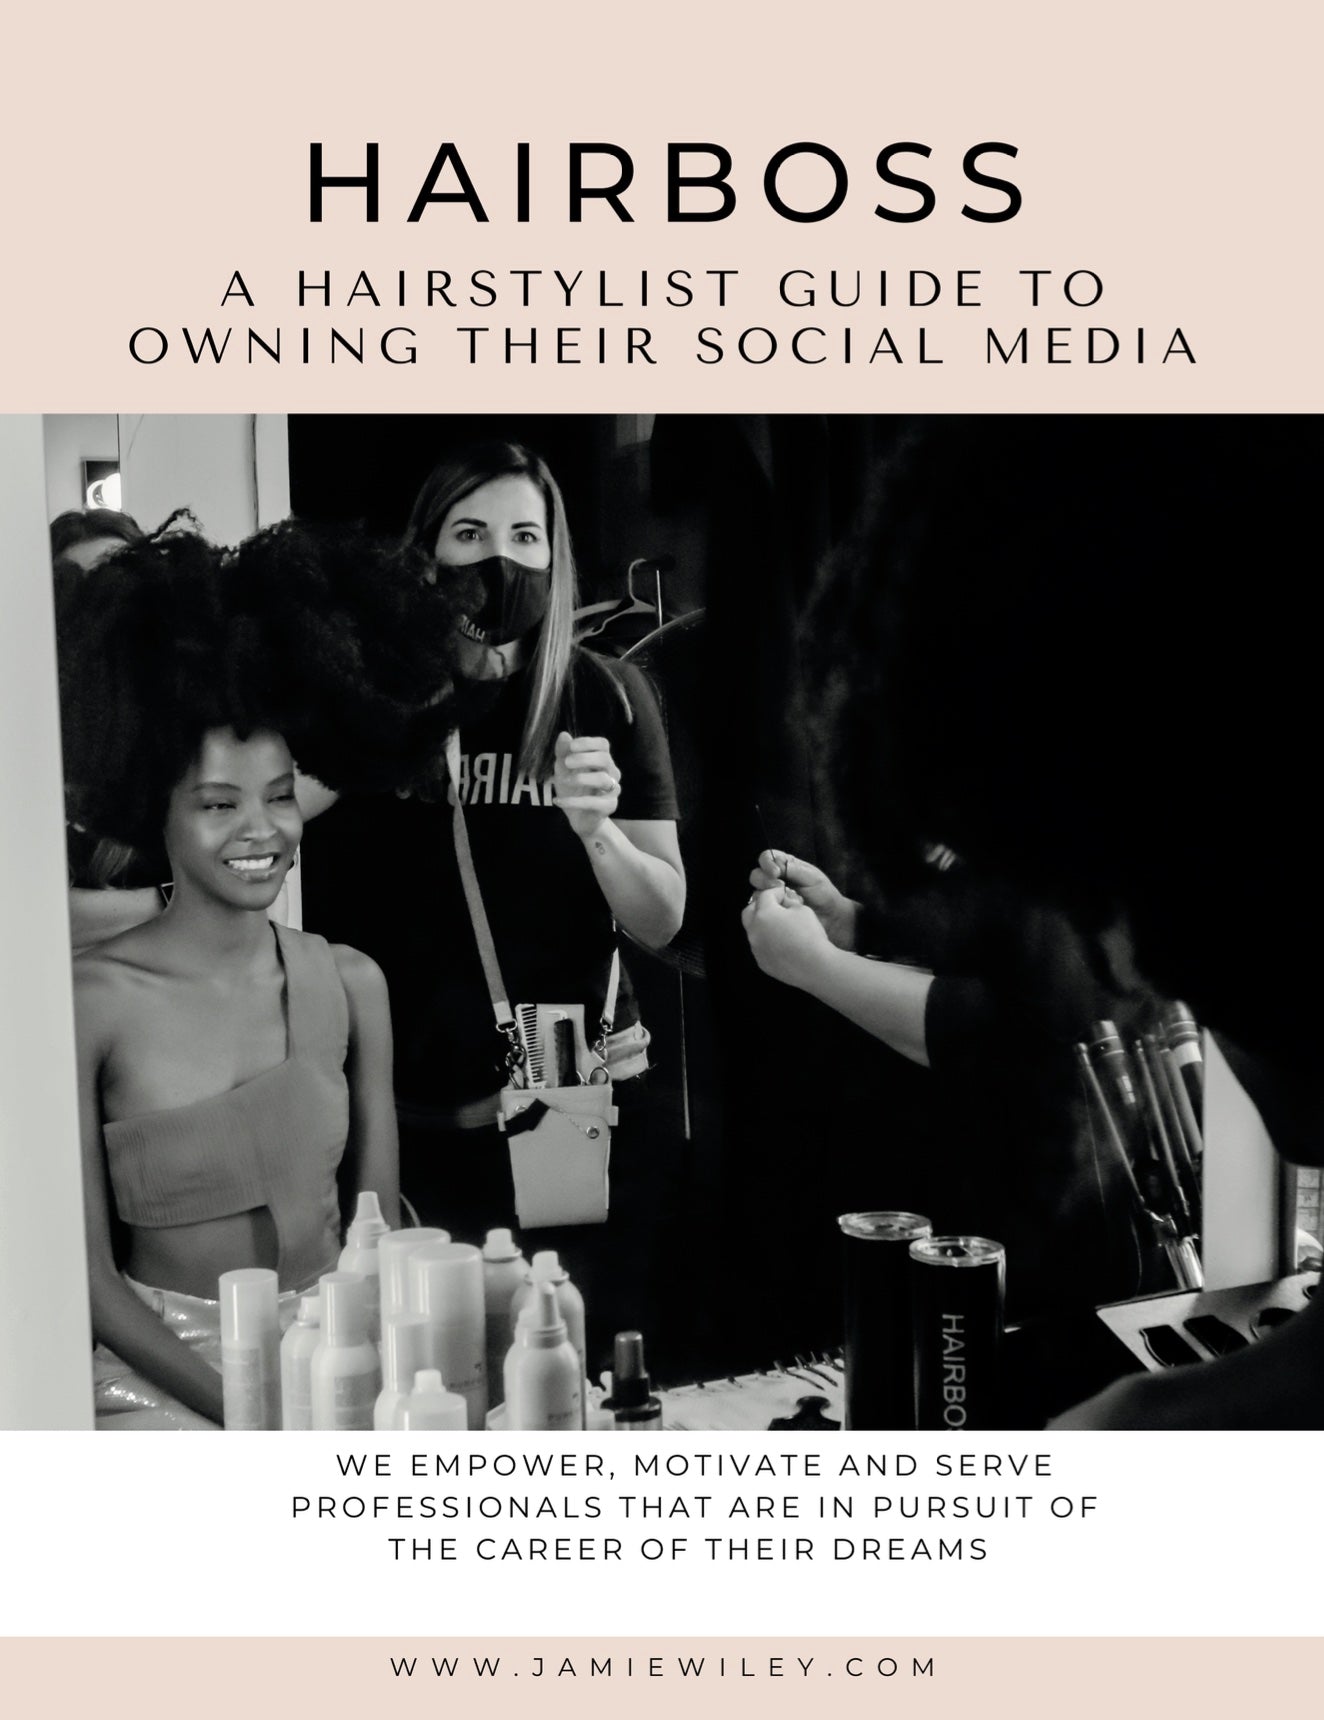 HAIRBOSS: A Hairstylist Guide to Owning Their Social Media